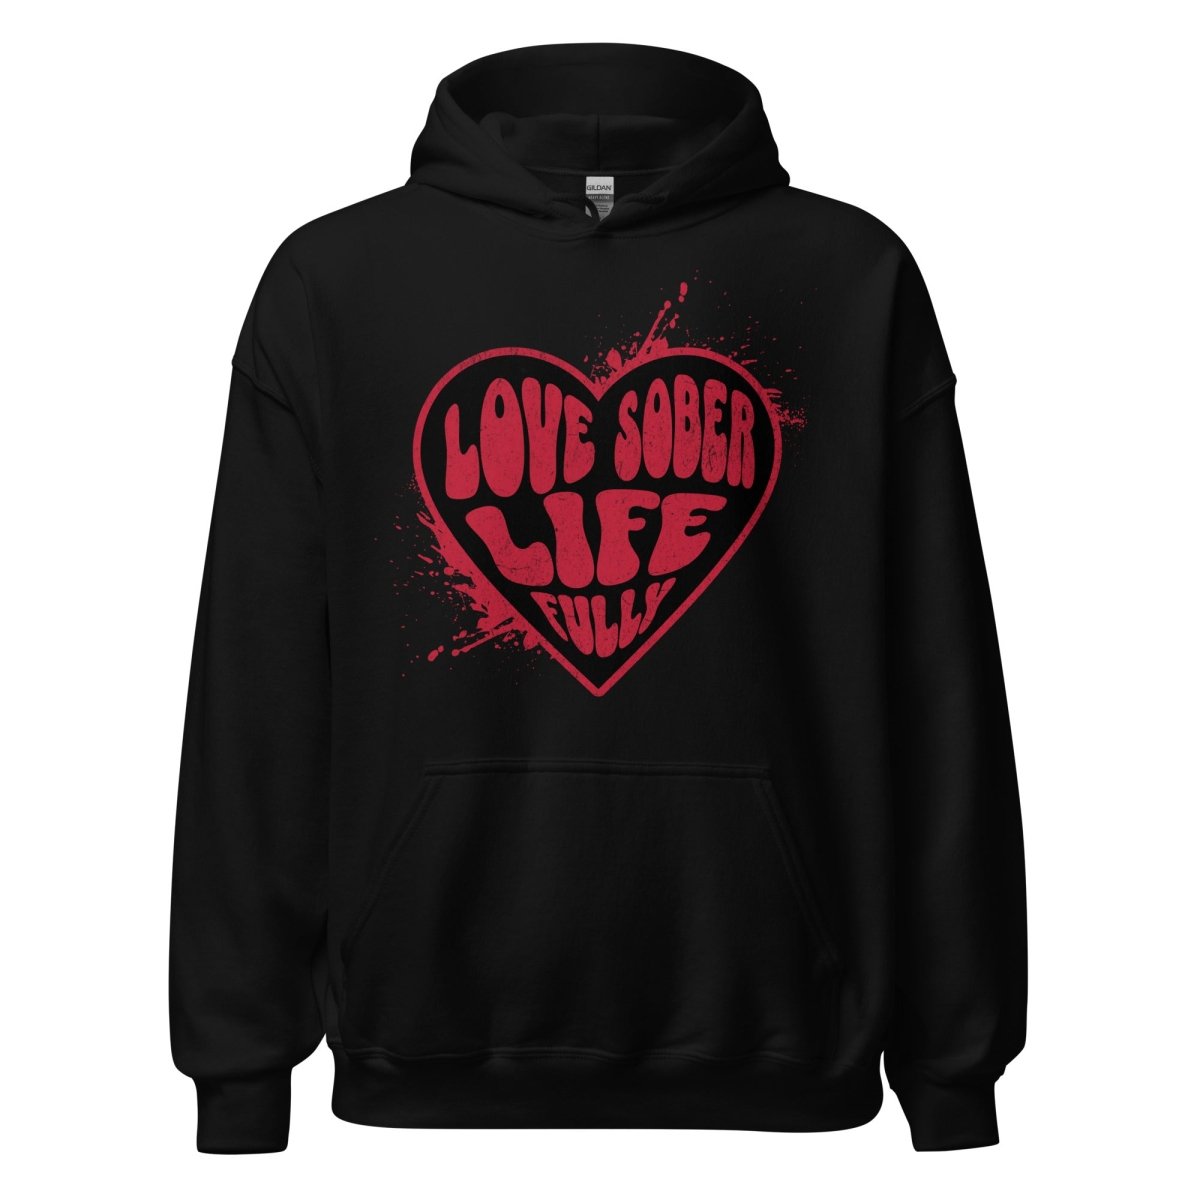 "Embrace Warmth & Wellness" - 'Love Sober Life Fully' Artistic Unisex Hoodie - S | Sobervation